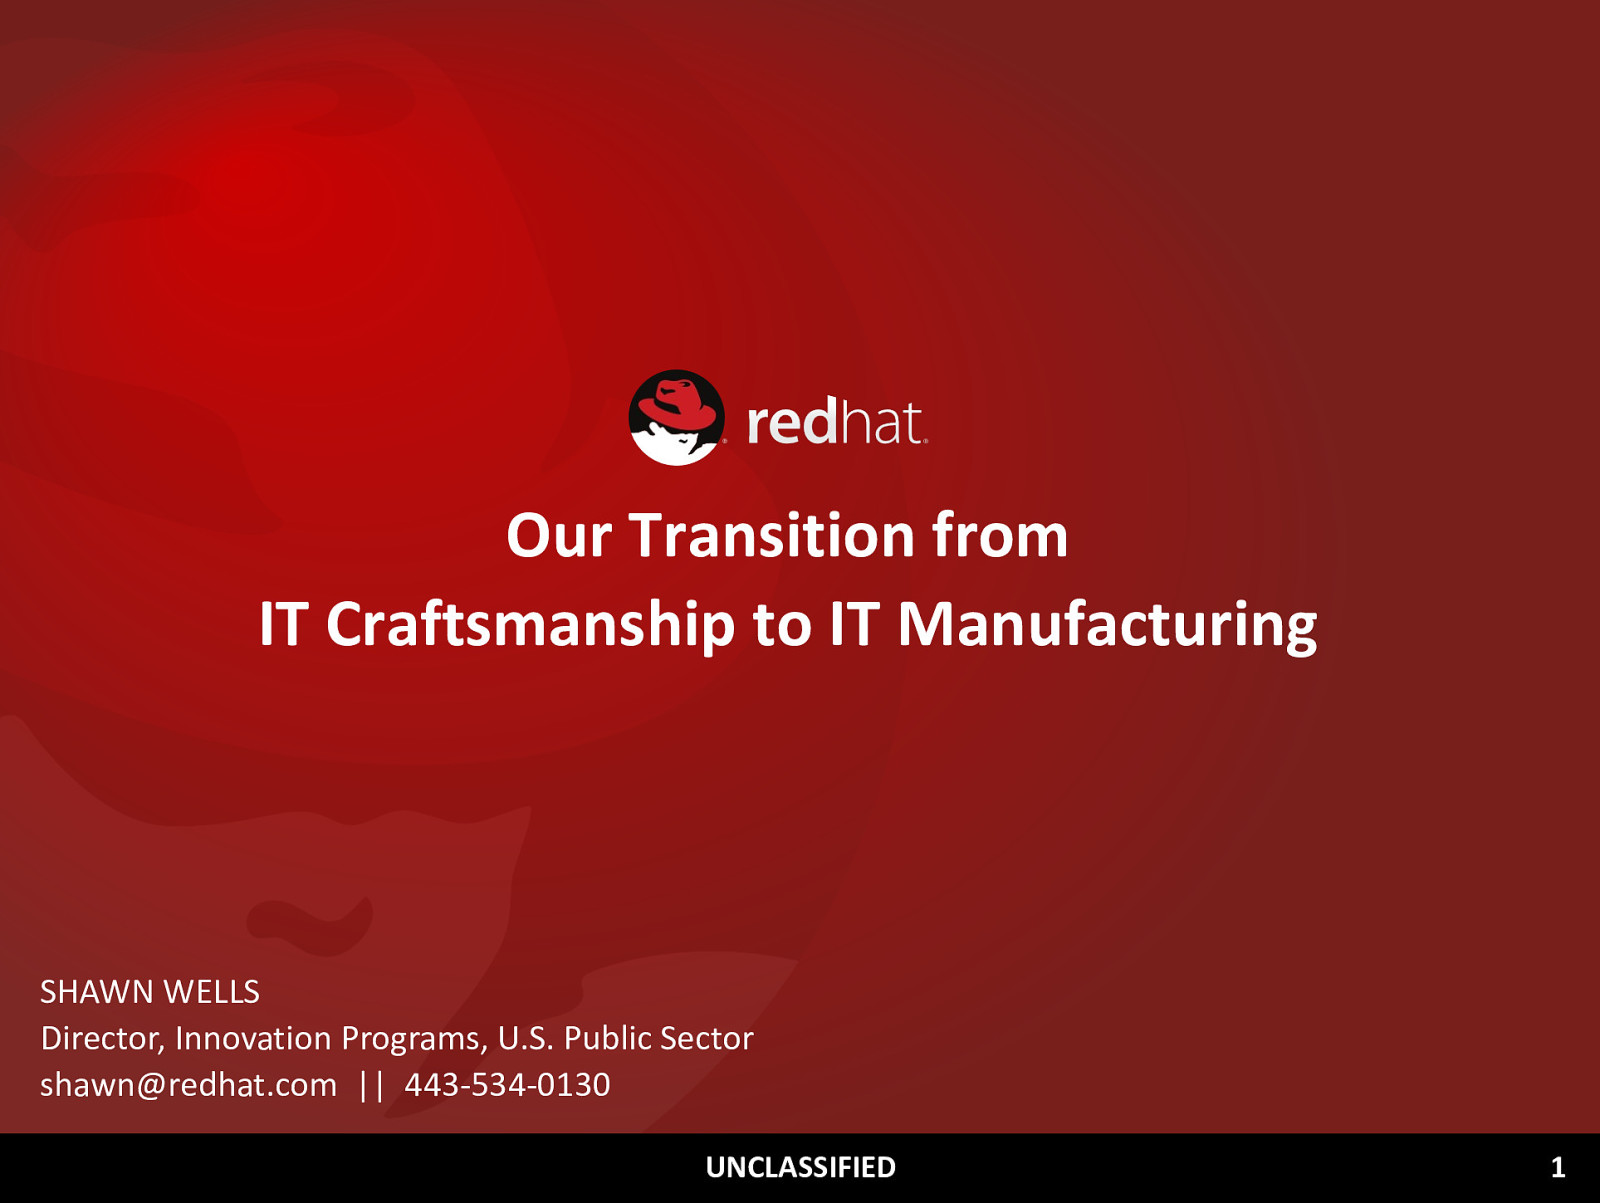 Our Transition from IT Craftsmanship to IT Manufacturing